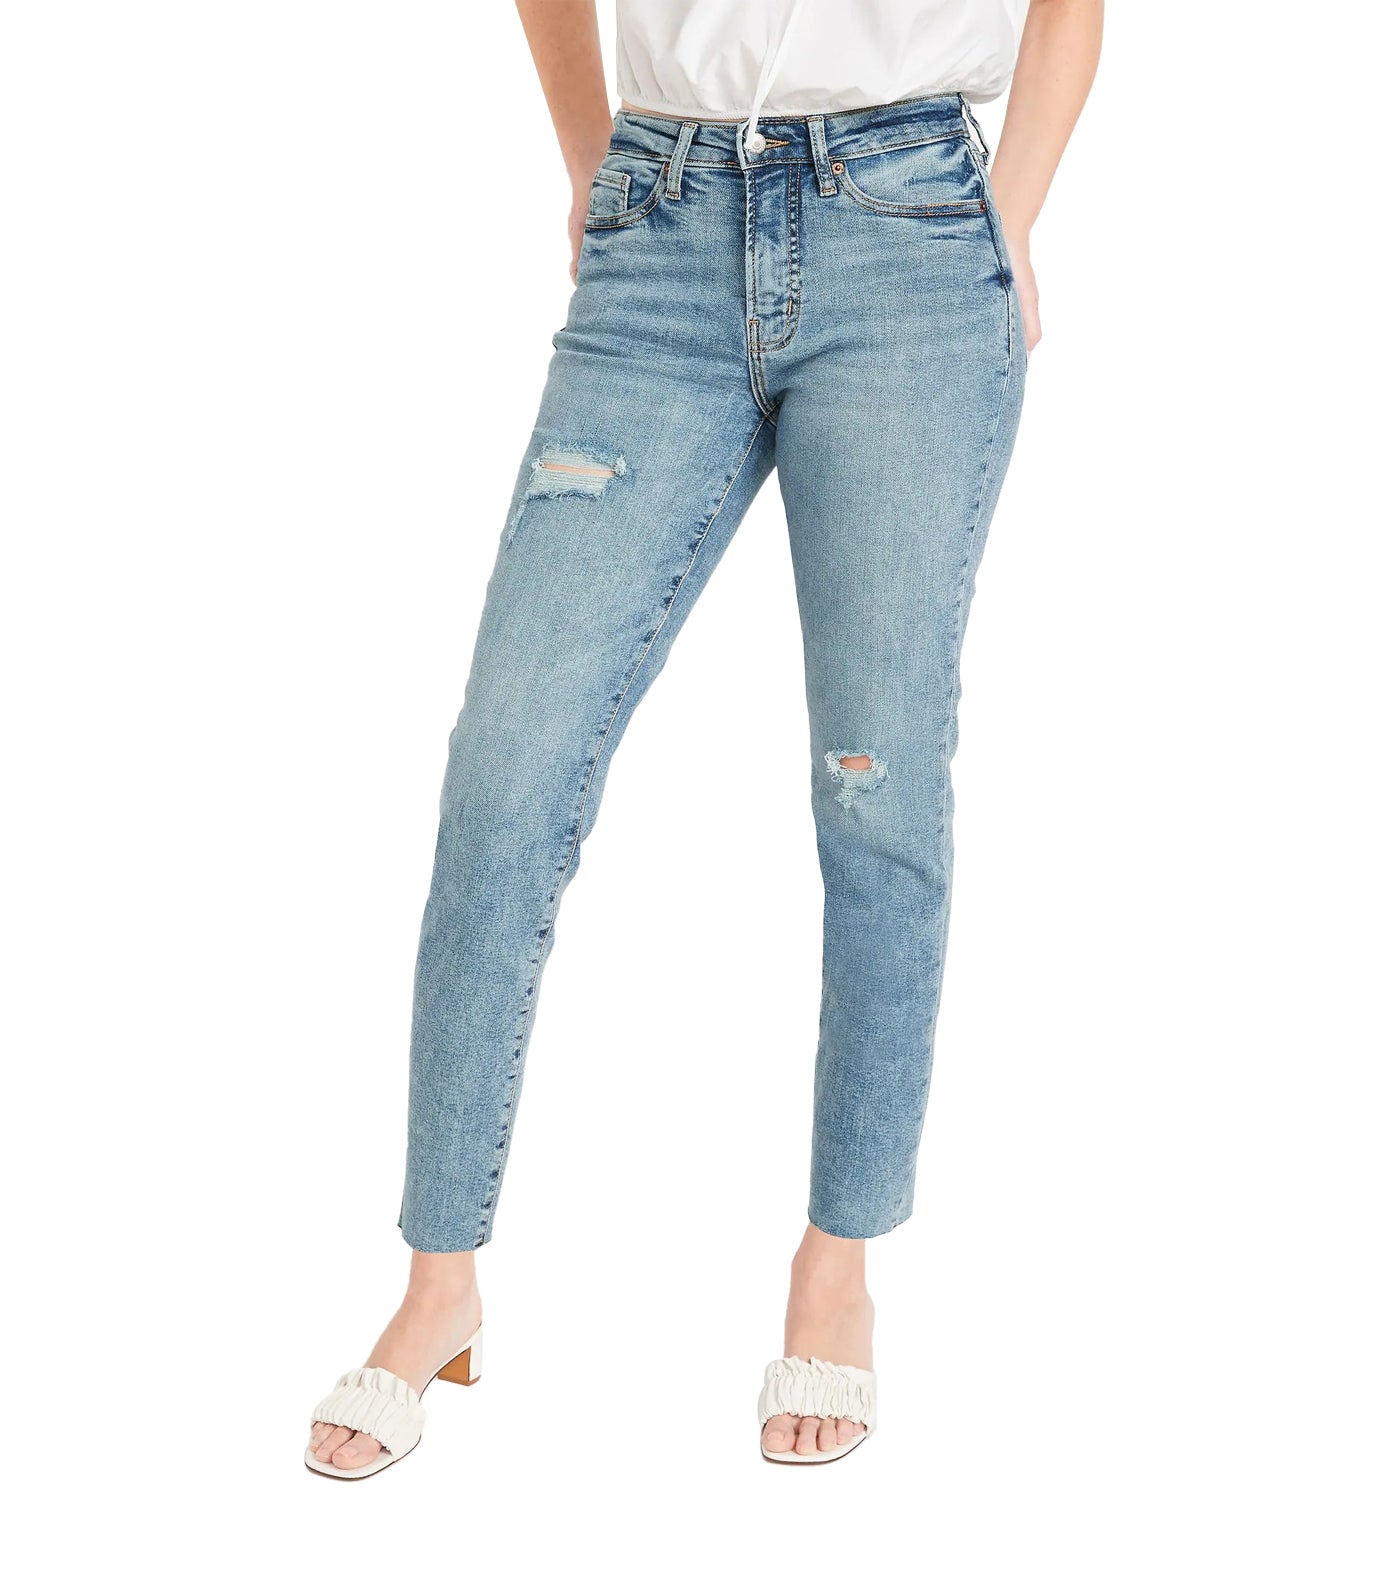 High-Waisted O.G. Straight Ripped Cut-Off Ankle Jeans for Women Cora